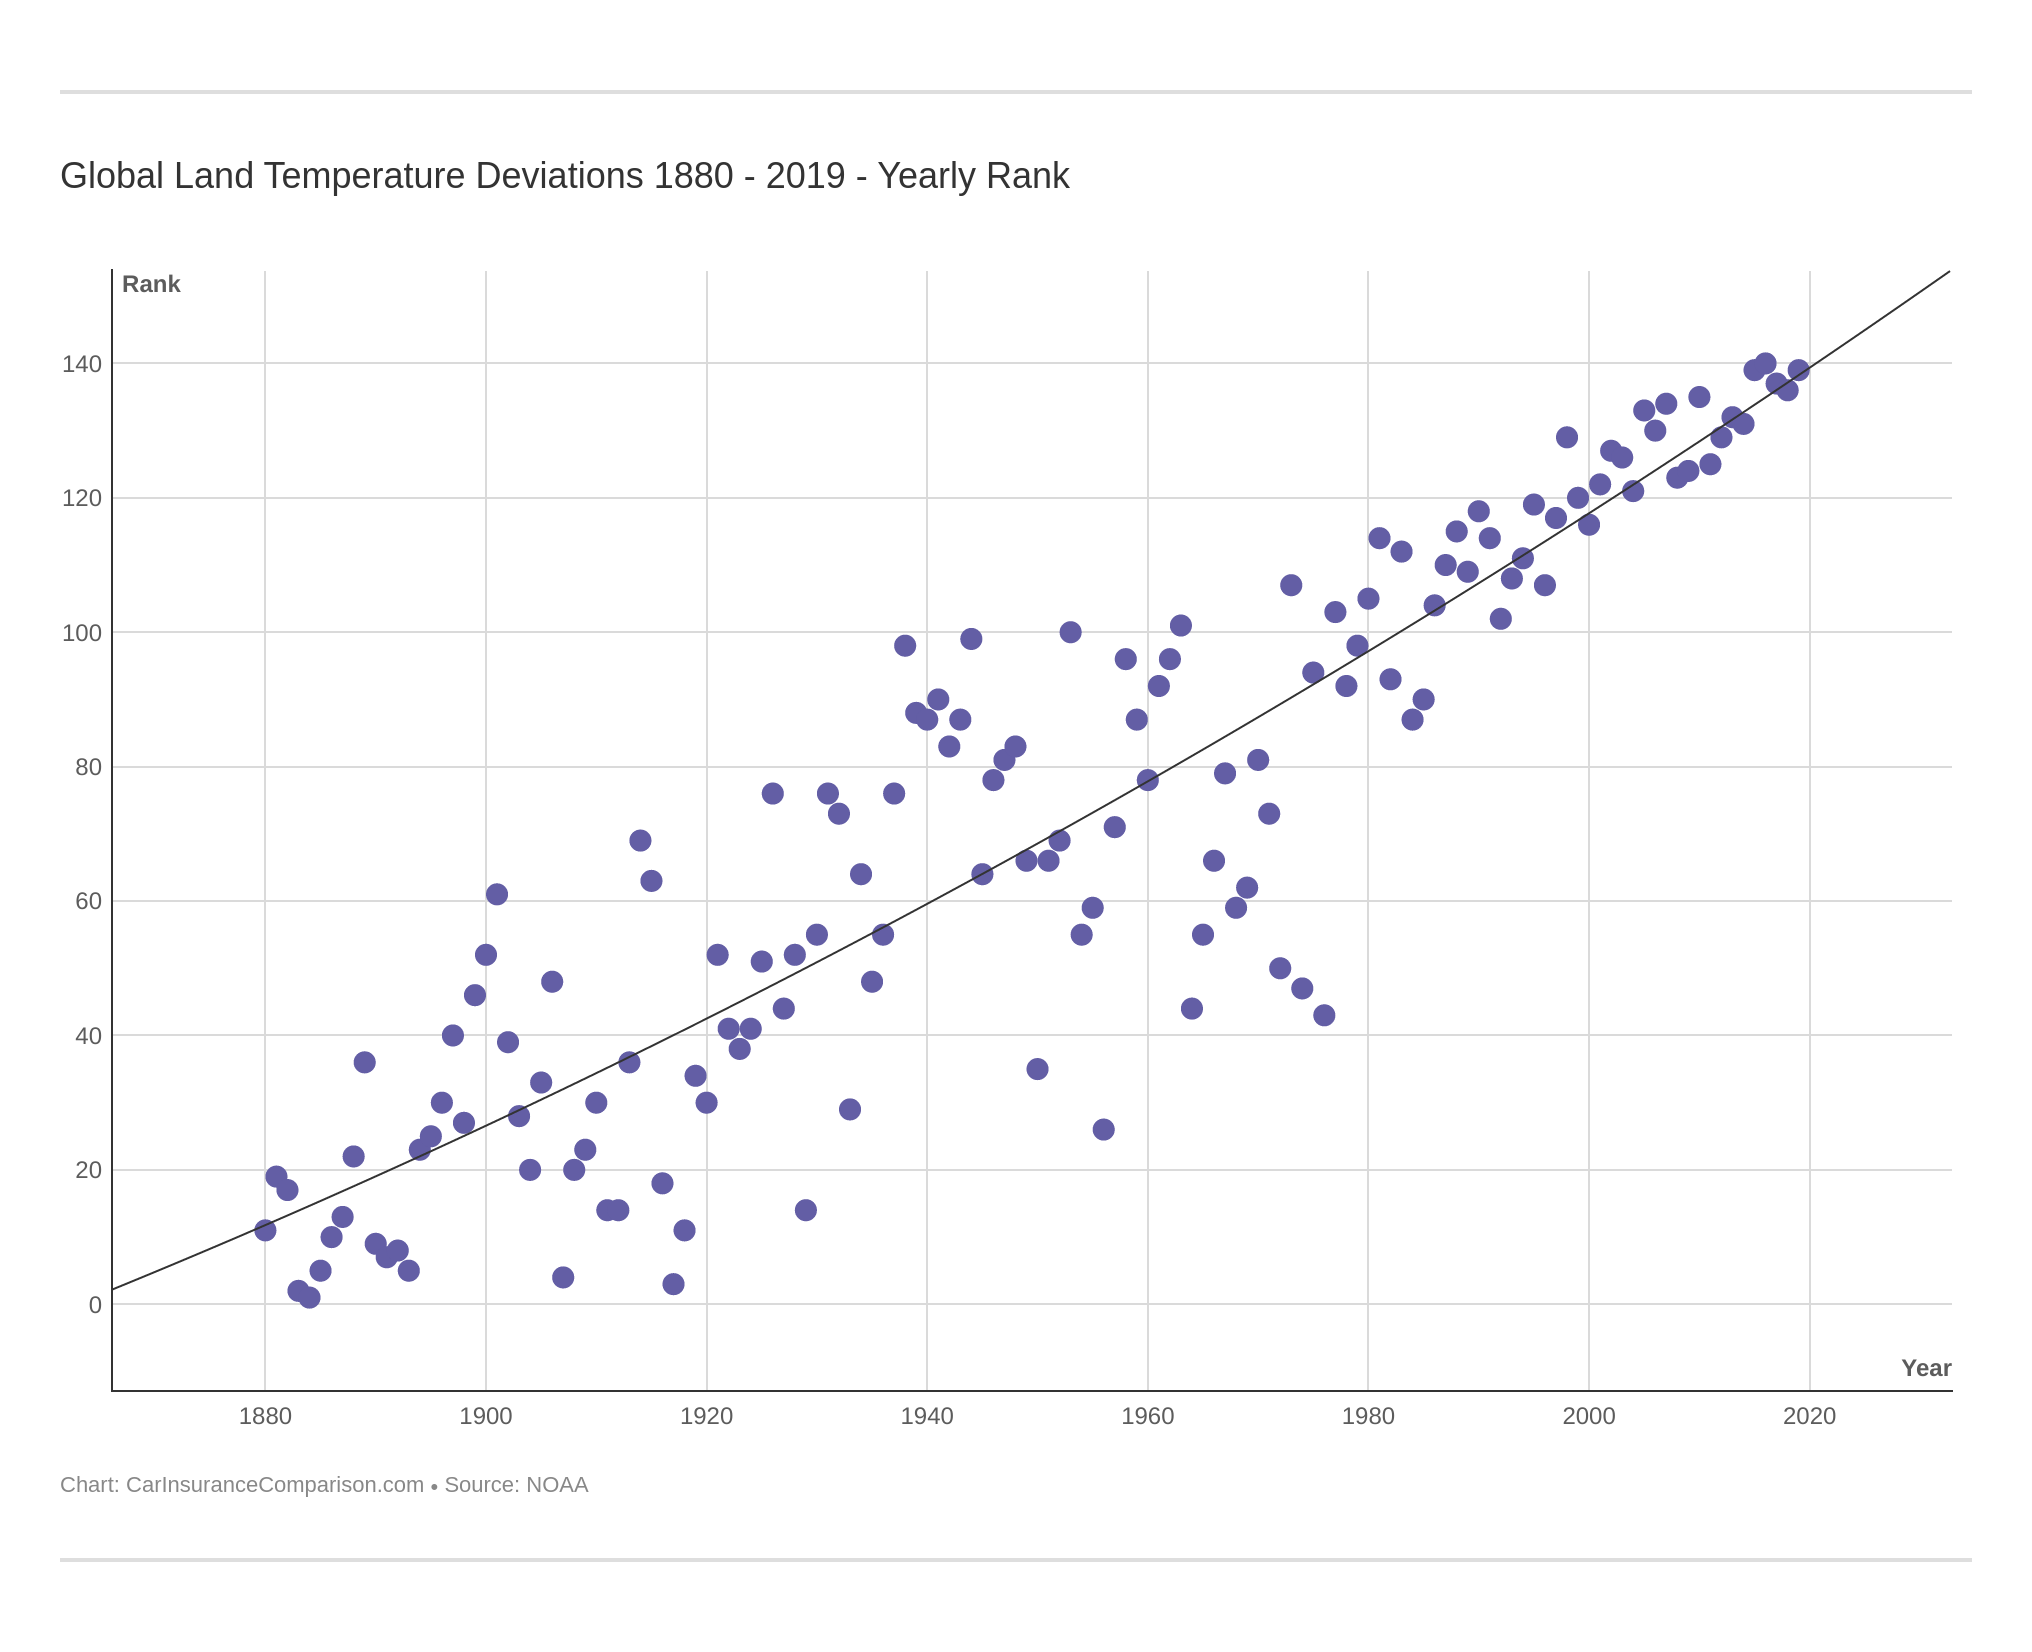 Global Land Temperature Deviations 1880 - 2019 - Yearly Rank